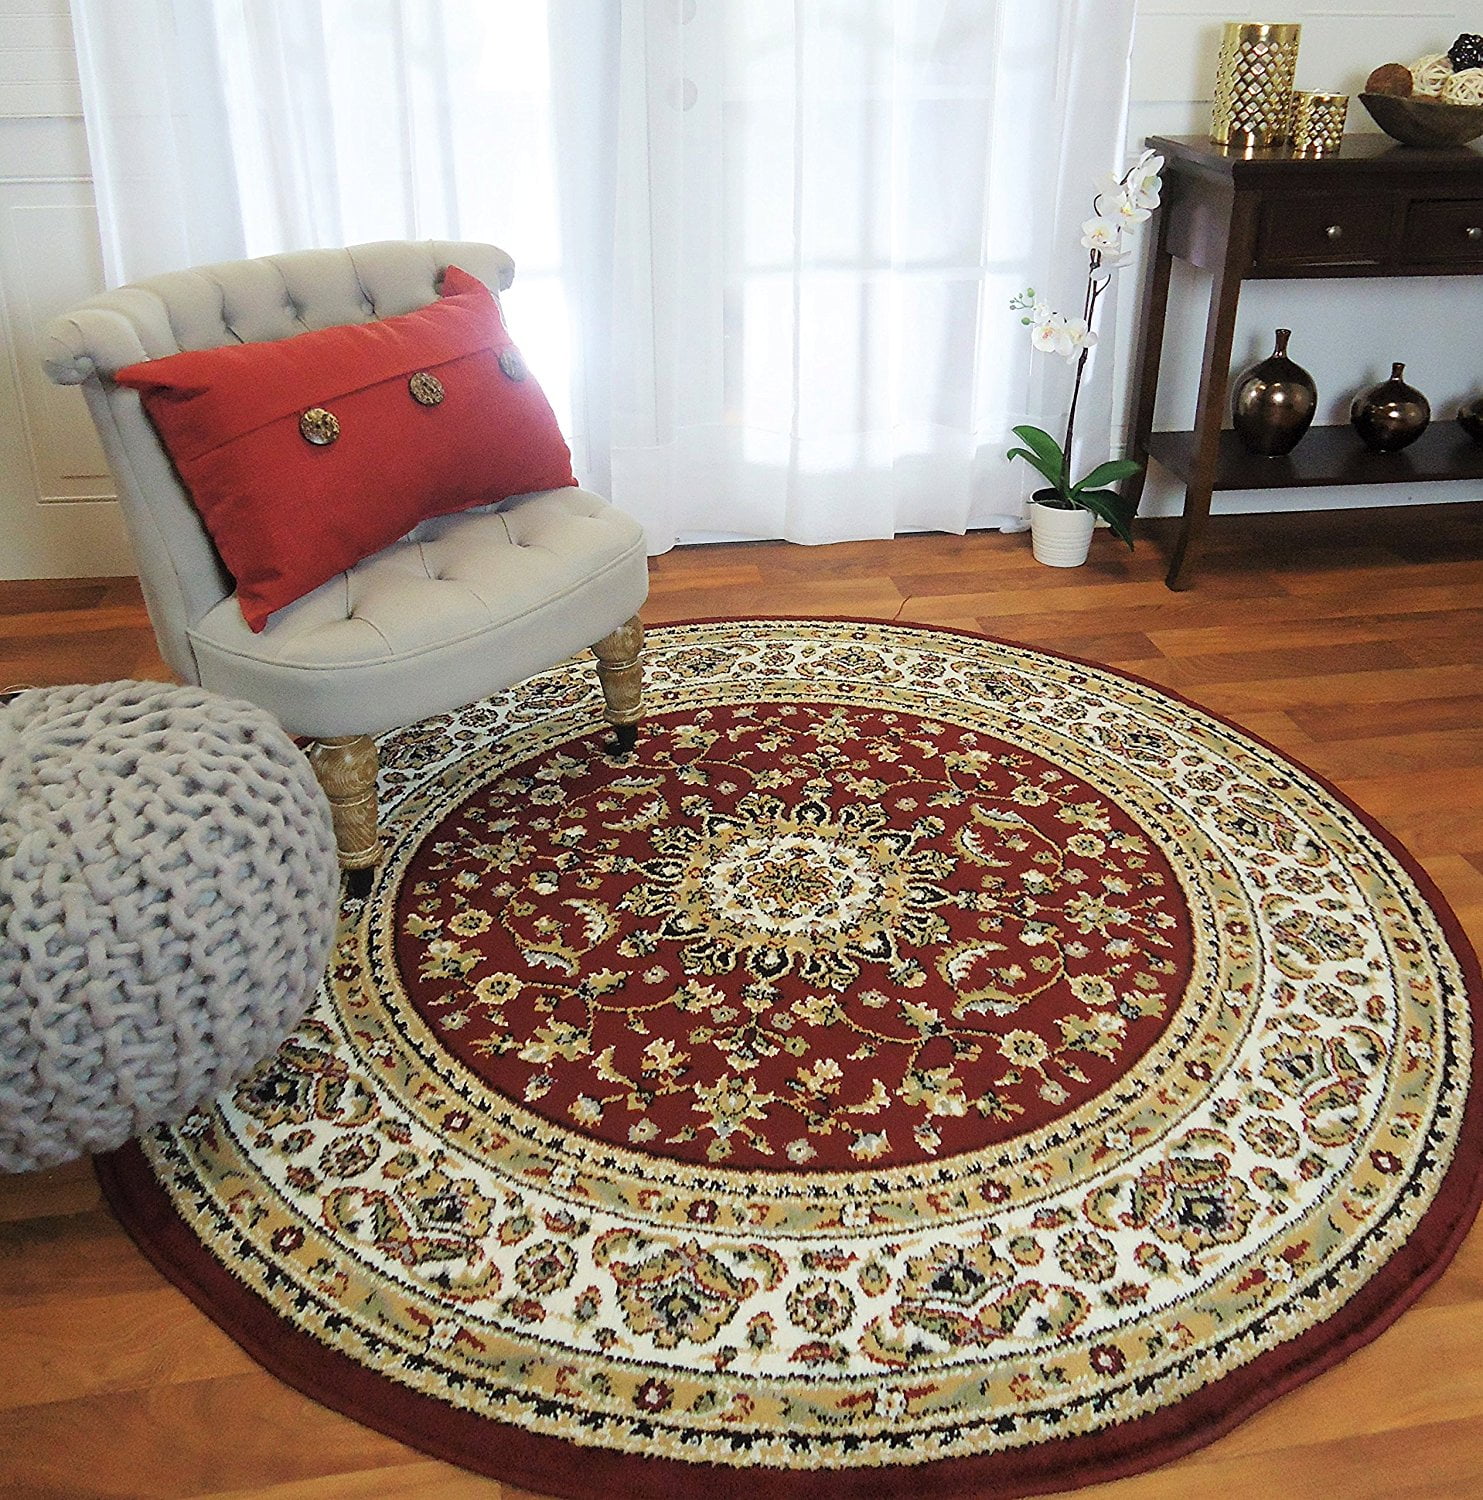 Round Rugs 6ft Clearance Red Com, How Big Is A 6 Ft Round Rug